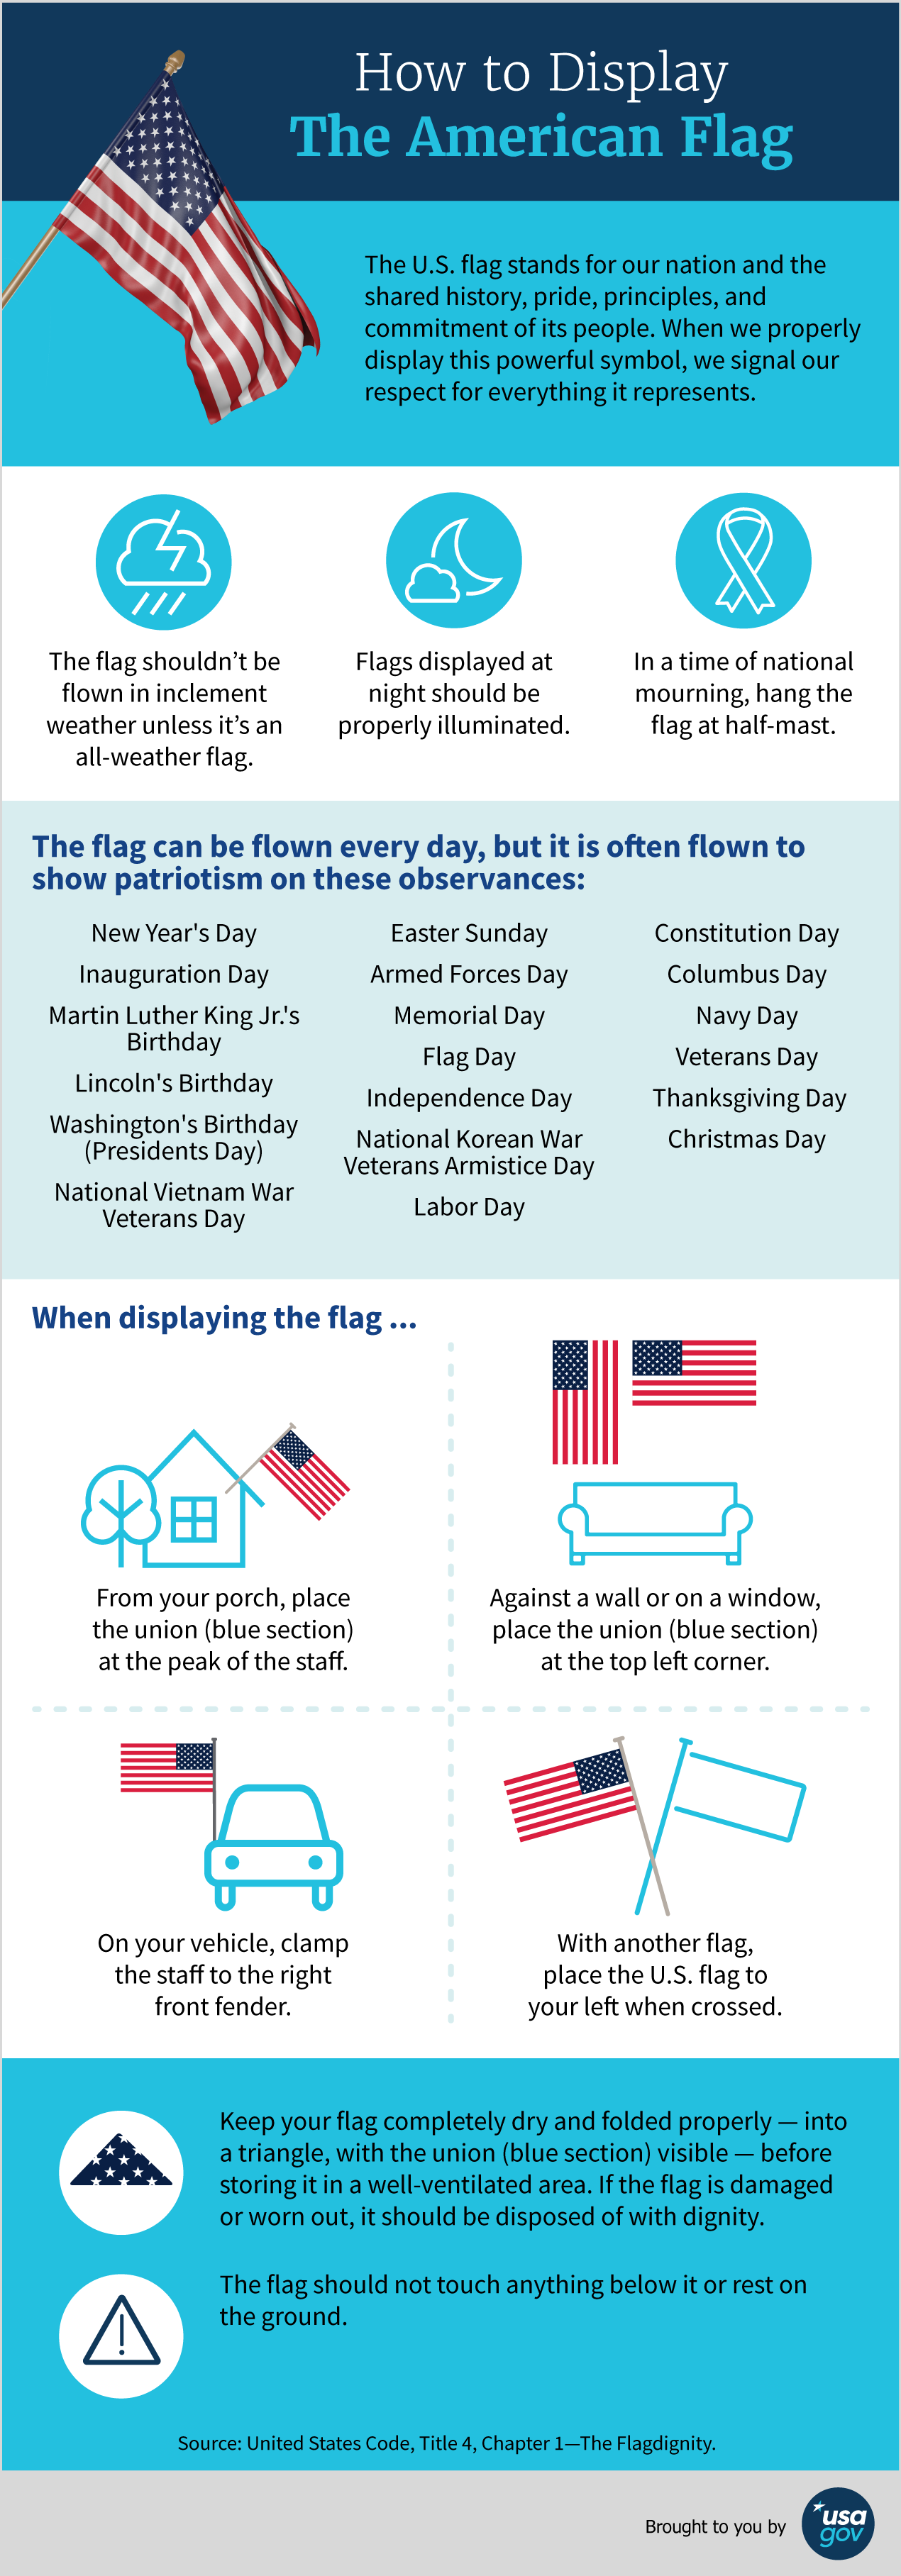 Infographic explaining how to display the American flag properly in different situations.